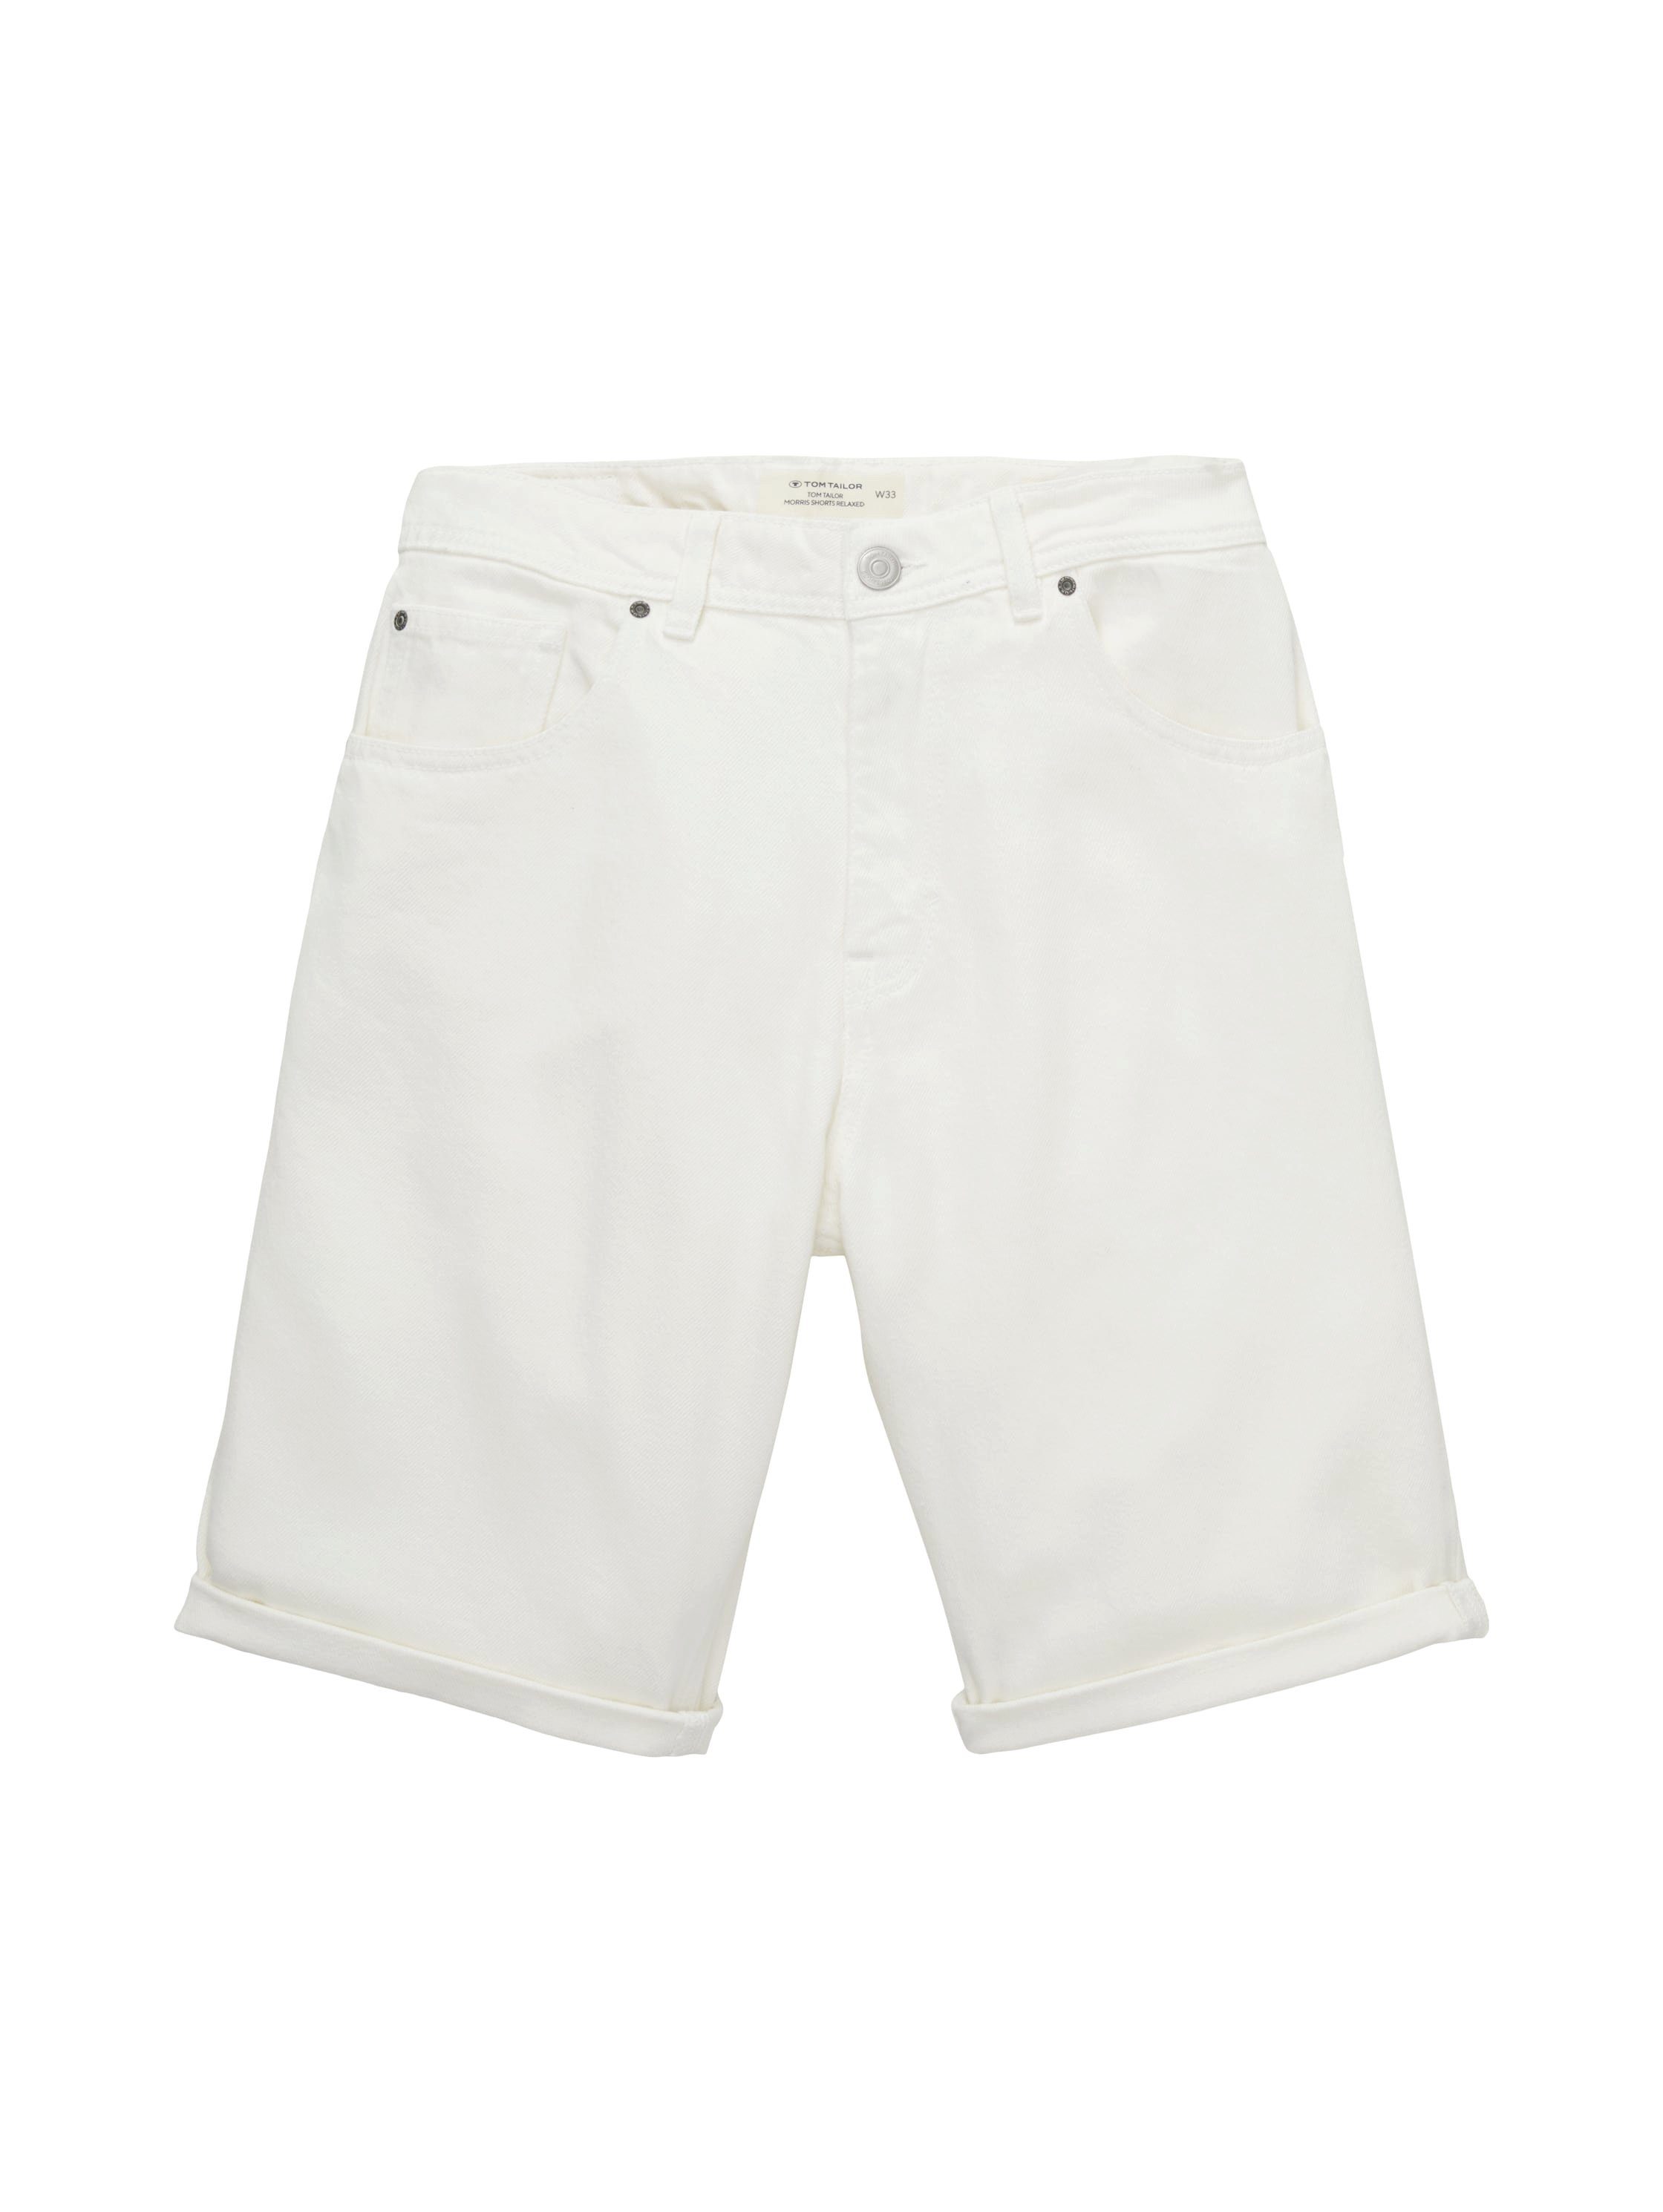 TOM TAILOR 5-Pocket-Jeans Shorts Jeans Relaxed